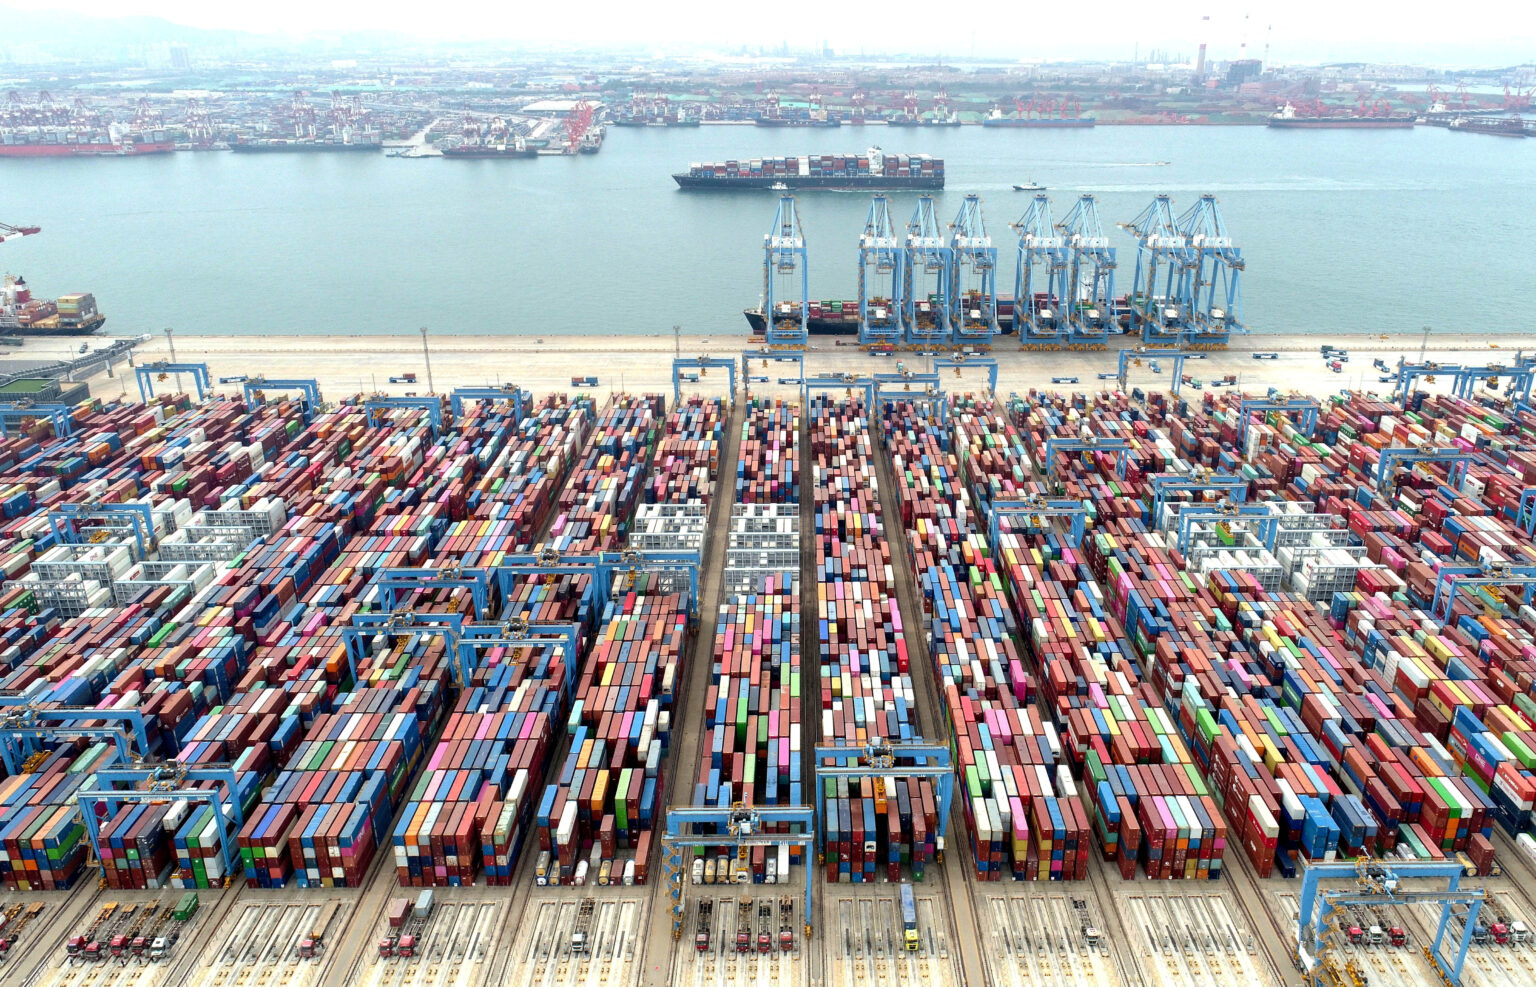 Containers and cargo vessels at Qingdao port in Shandong province